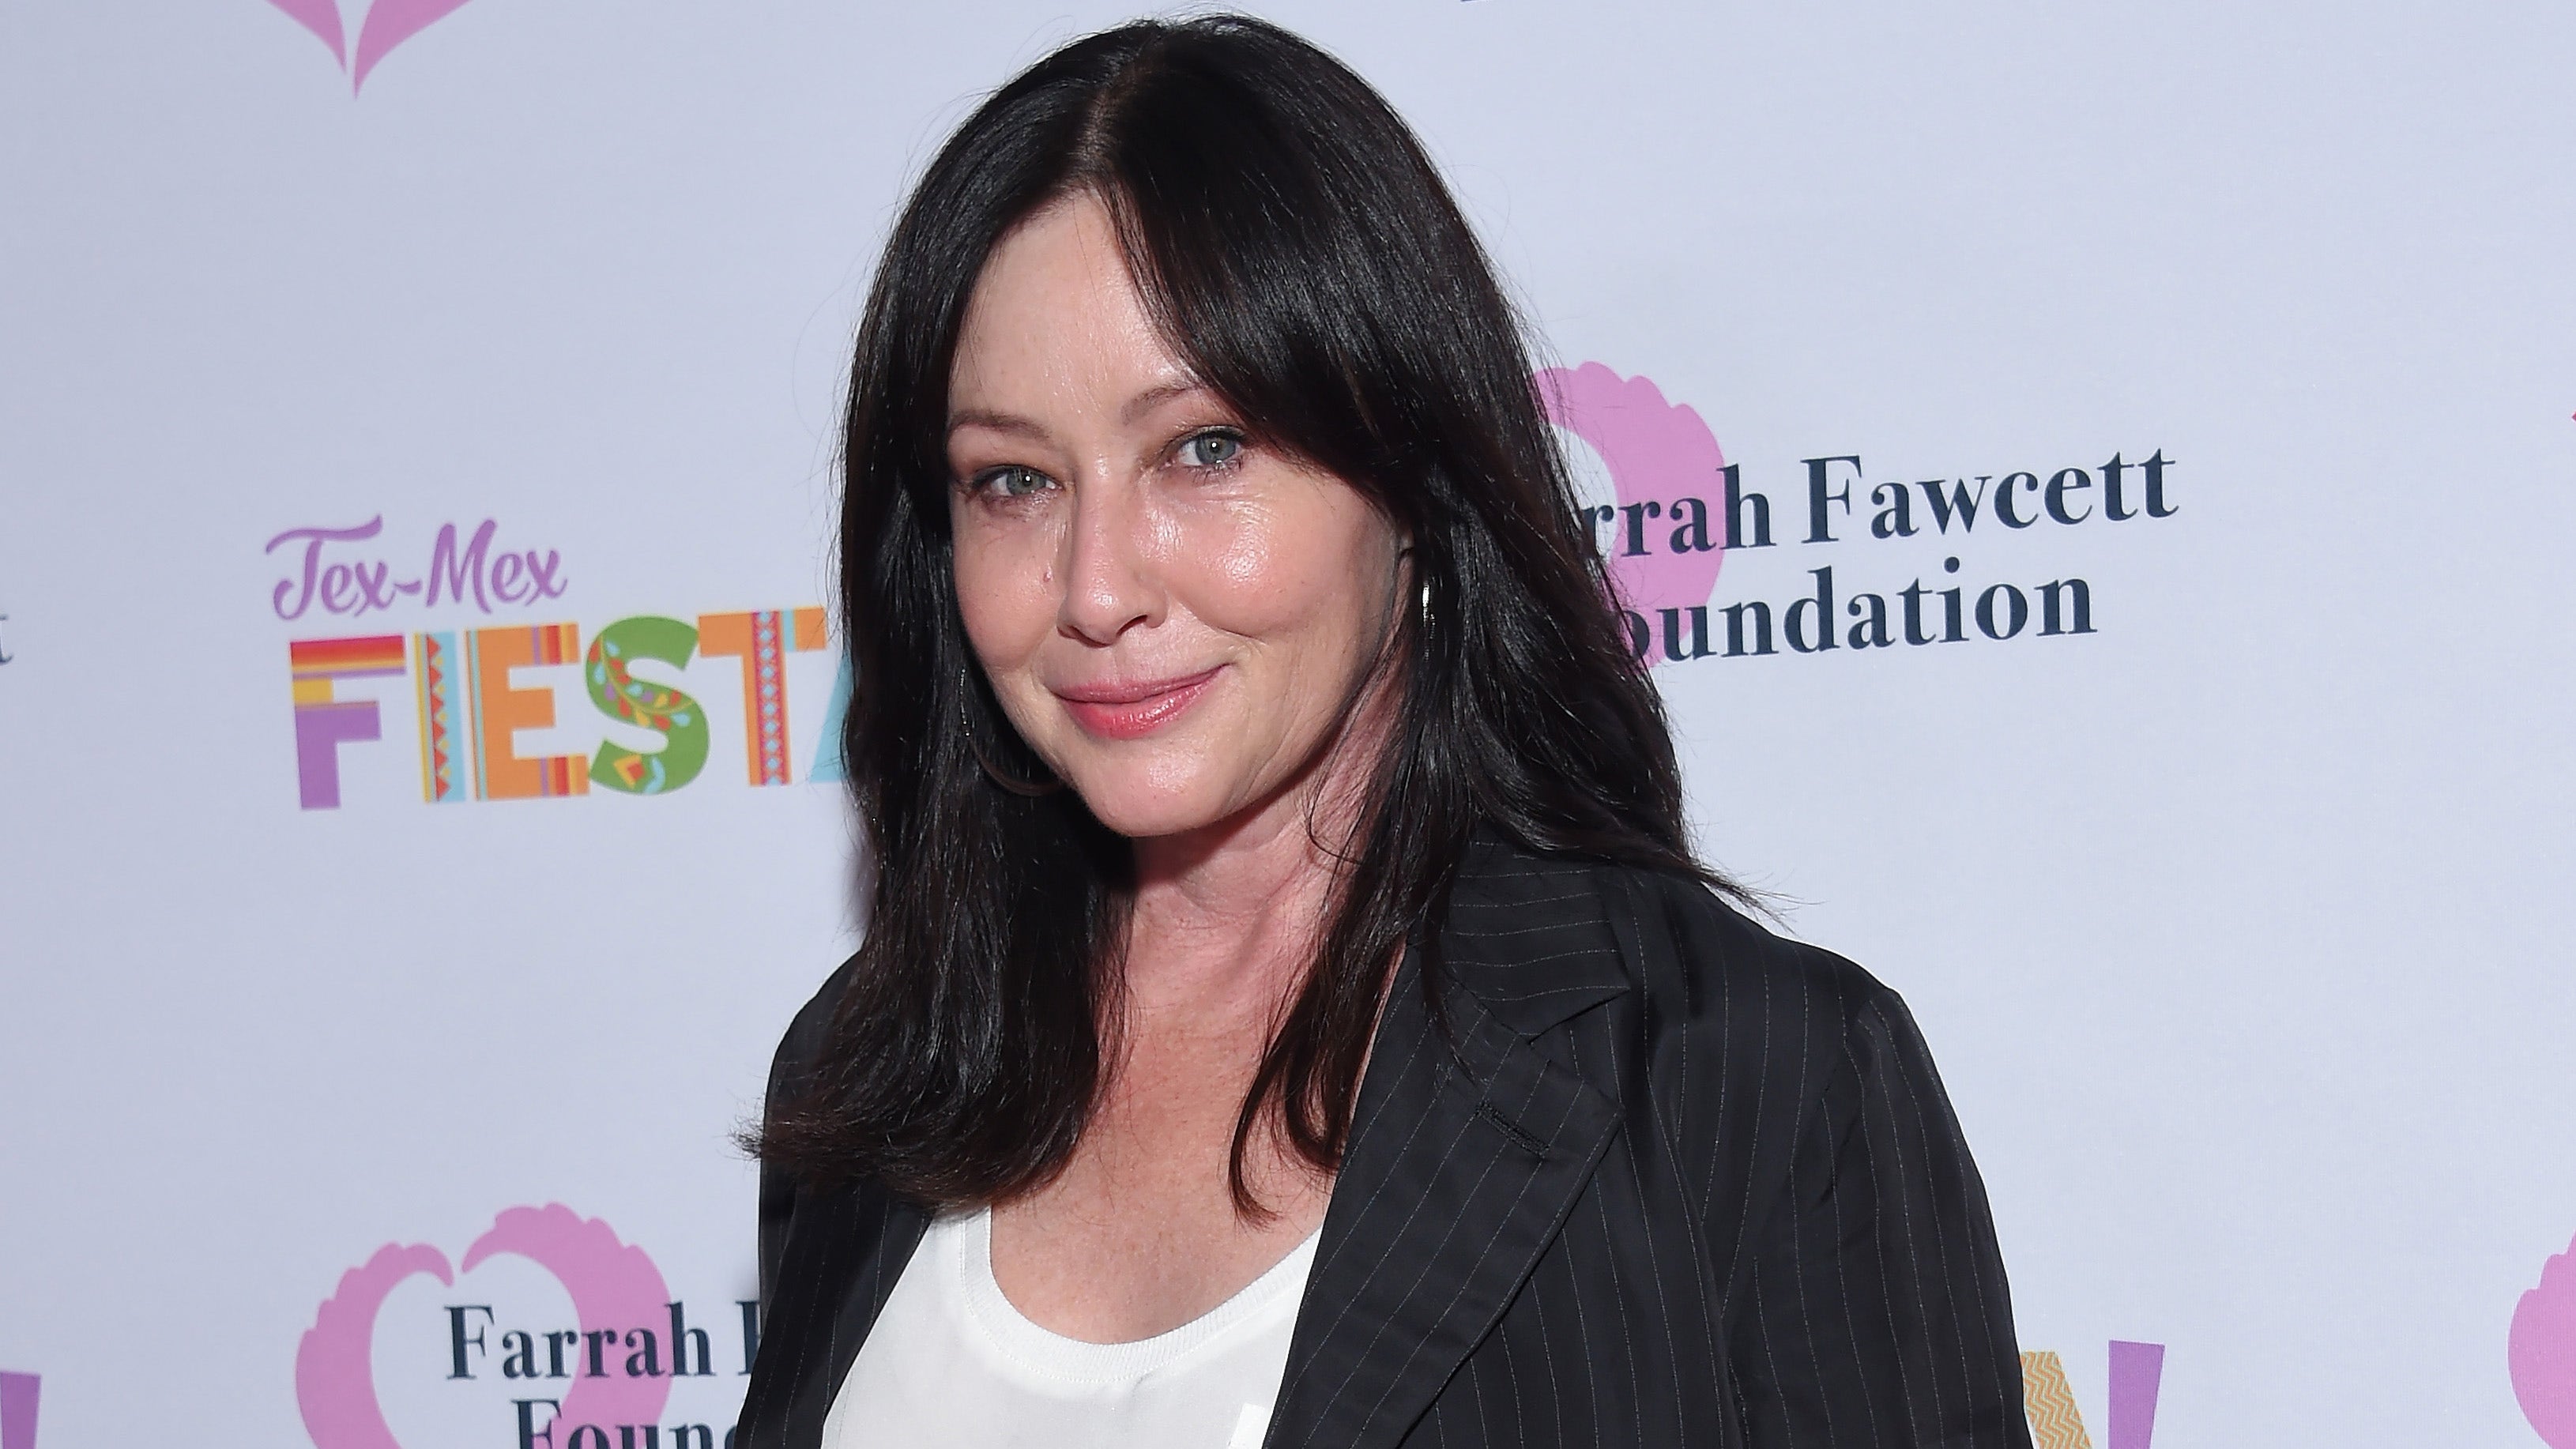 Shannen Doherty posts makeup-free photo as actress shares she's over Hollywood's beauty standards